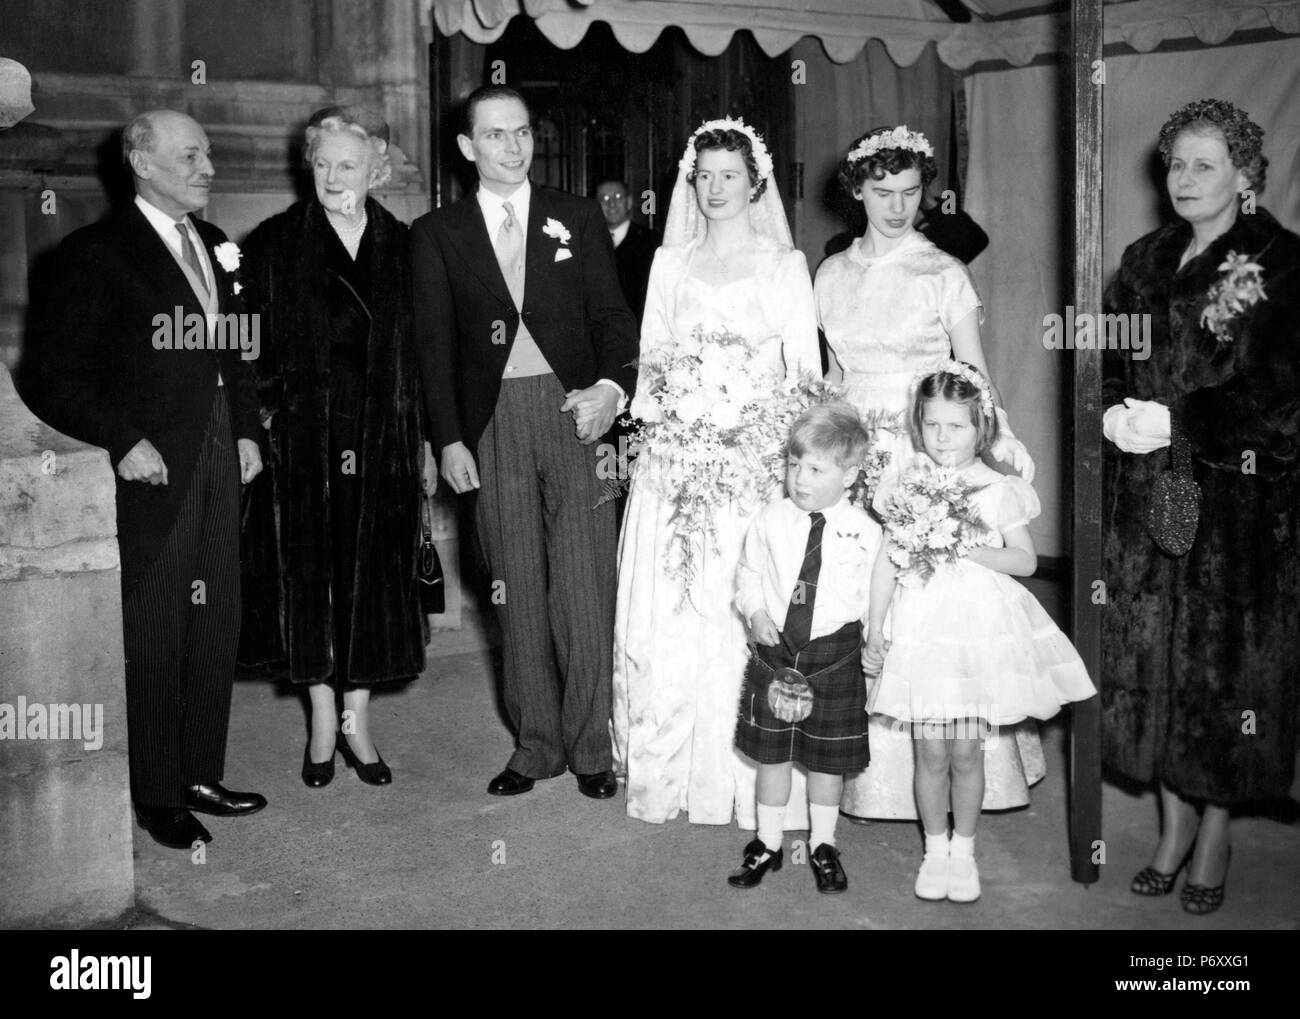 (L-R) Right Hon. Clement Attlee, father often groom, guest Lady Churchill, wife of the Prime Minister, the bridegroom, Martin Richard Attlee and his bride, the former Anne Barbara Henderson, bridal attendants and Mrs Clement Attlee, the bridegroom's mother. *Neg corrupt, scanned from contact Stock Photo